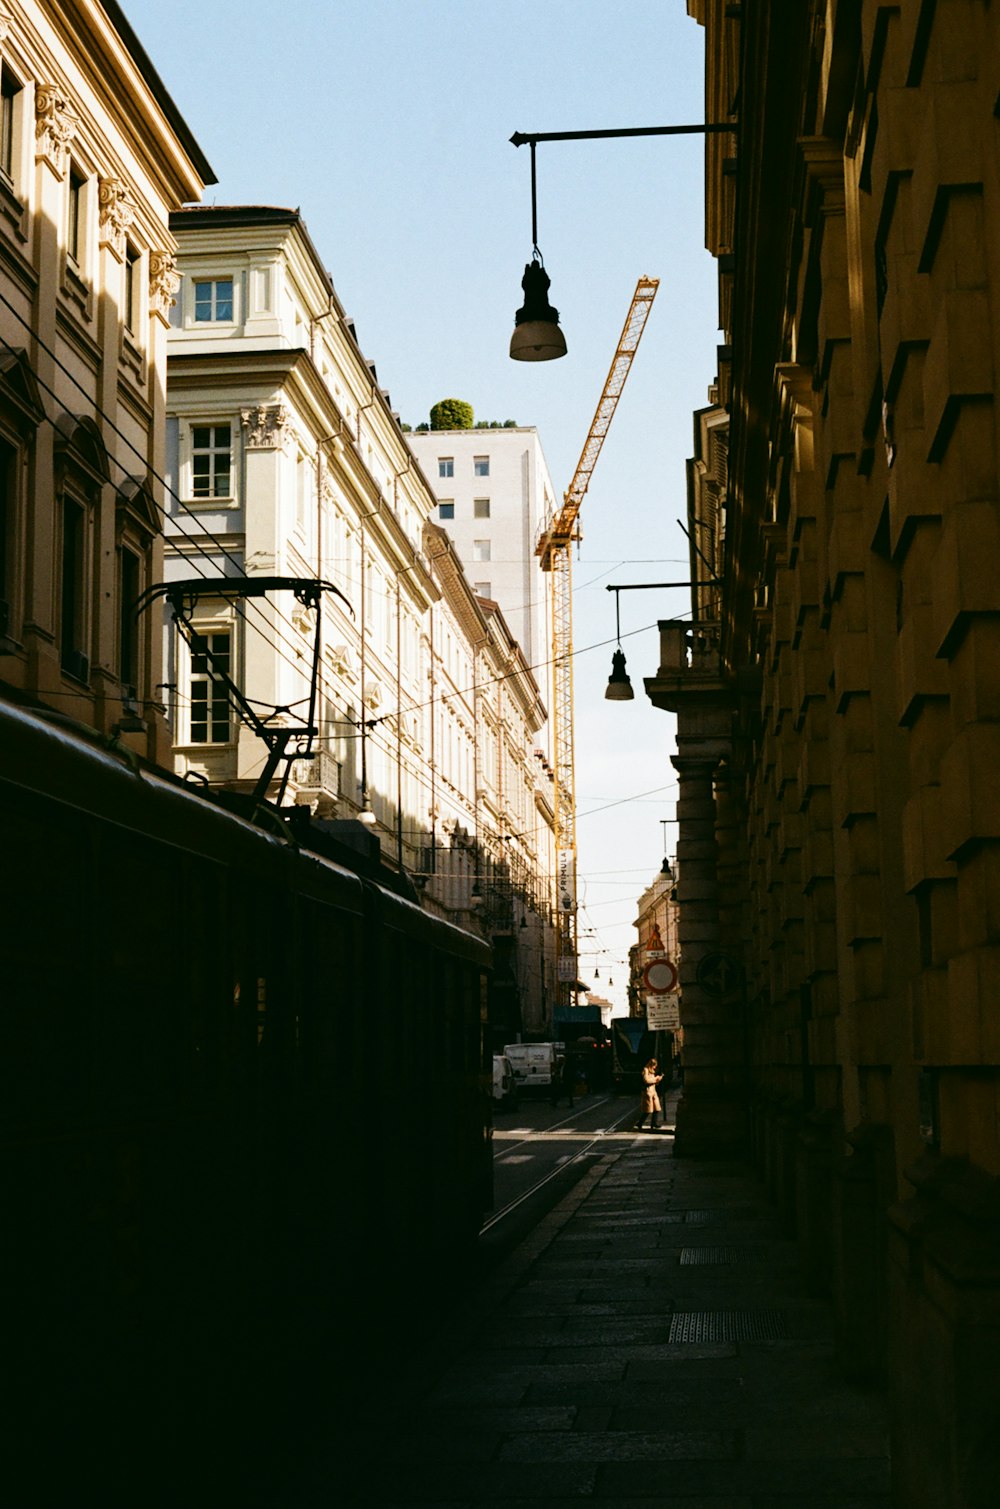 a view of a city street with a crane in the background